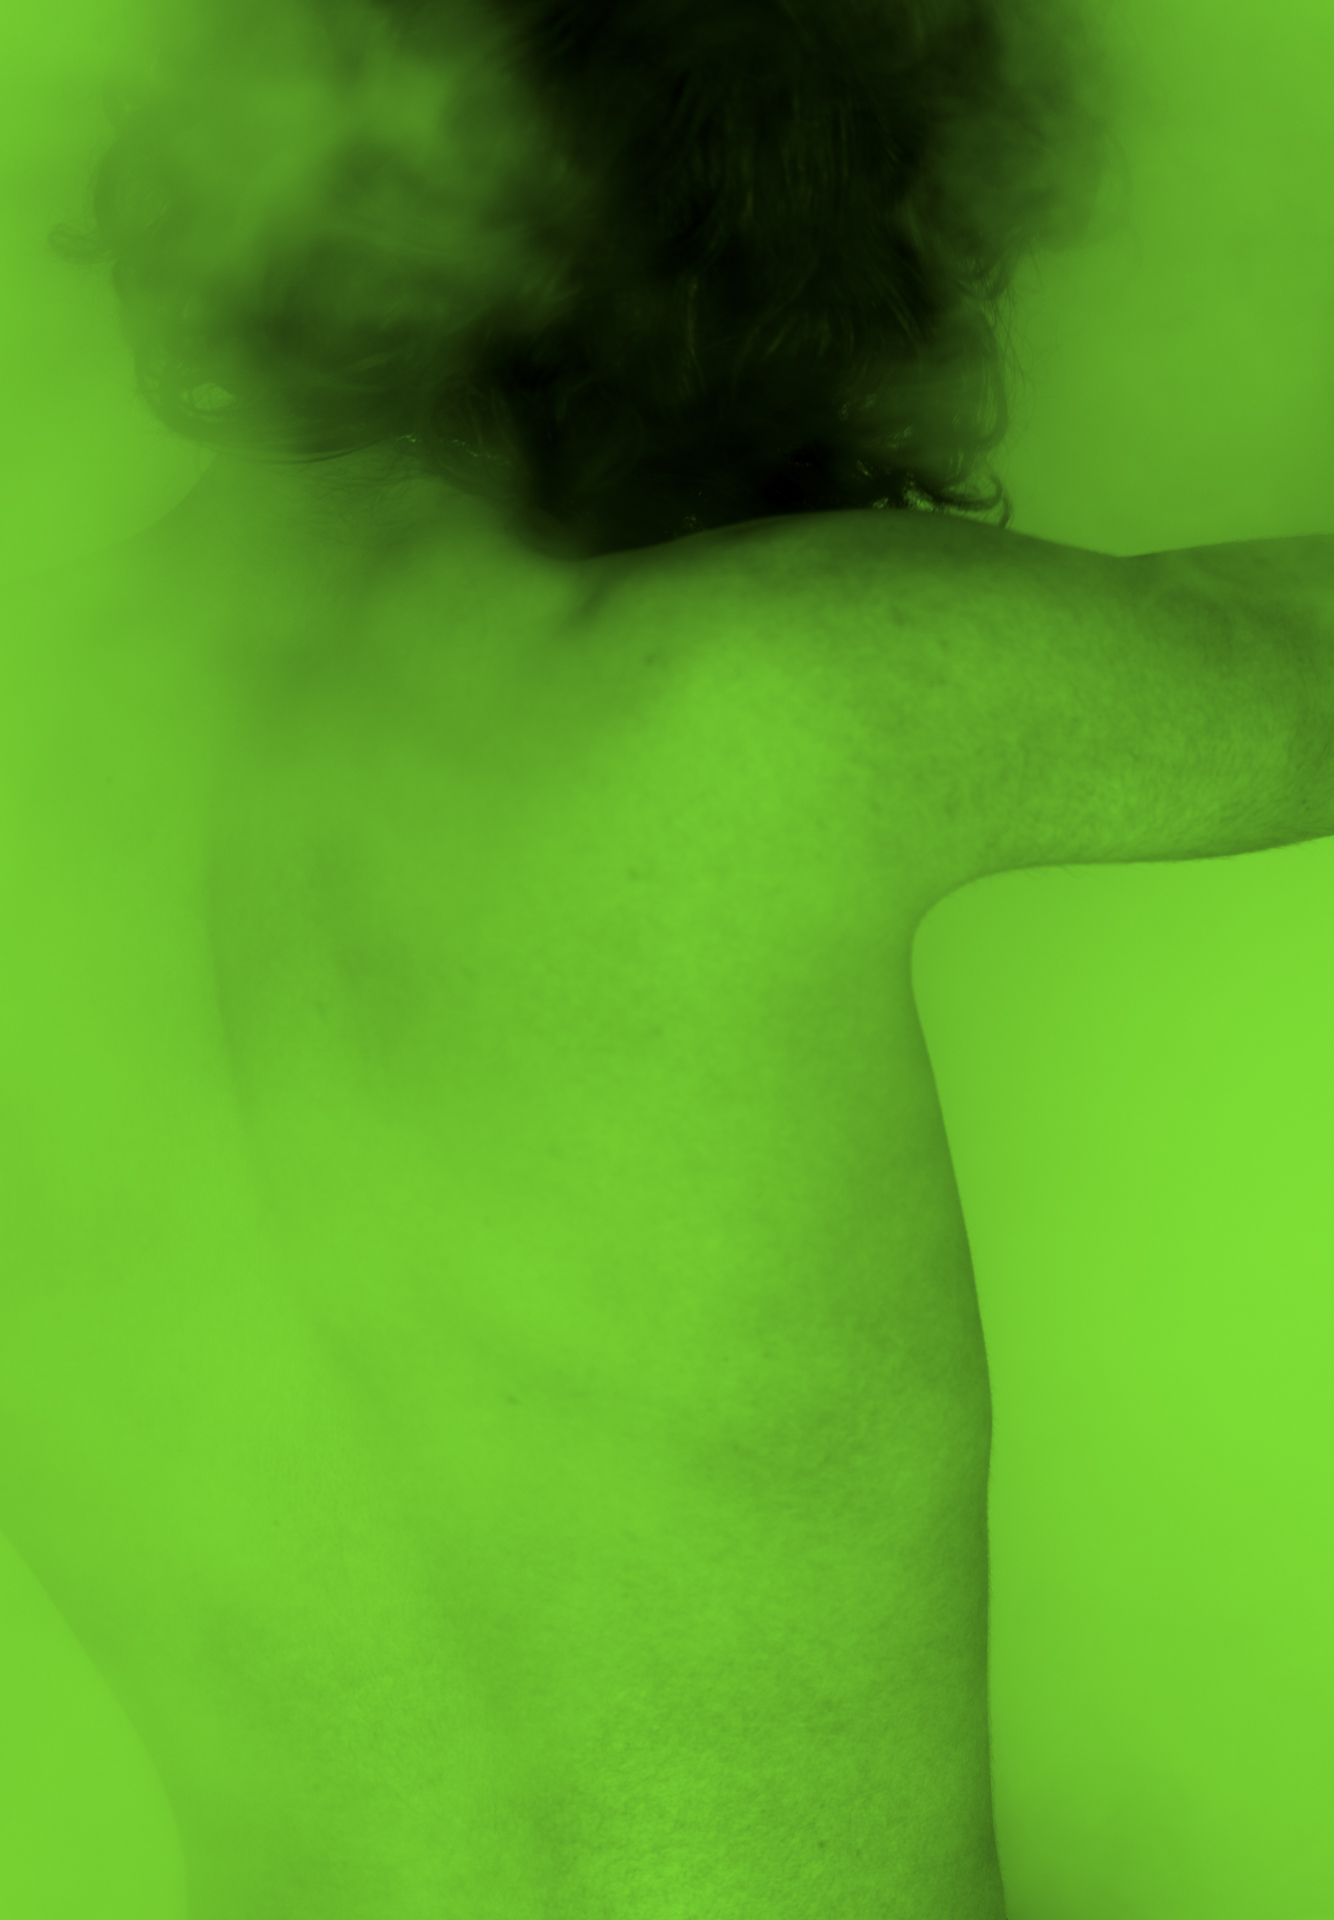 green tone abstract portrait of a person's back